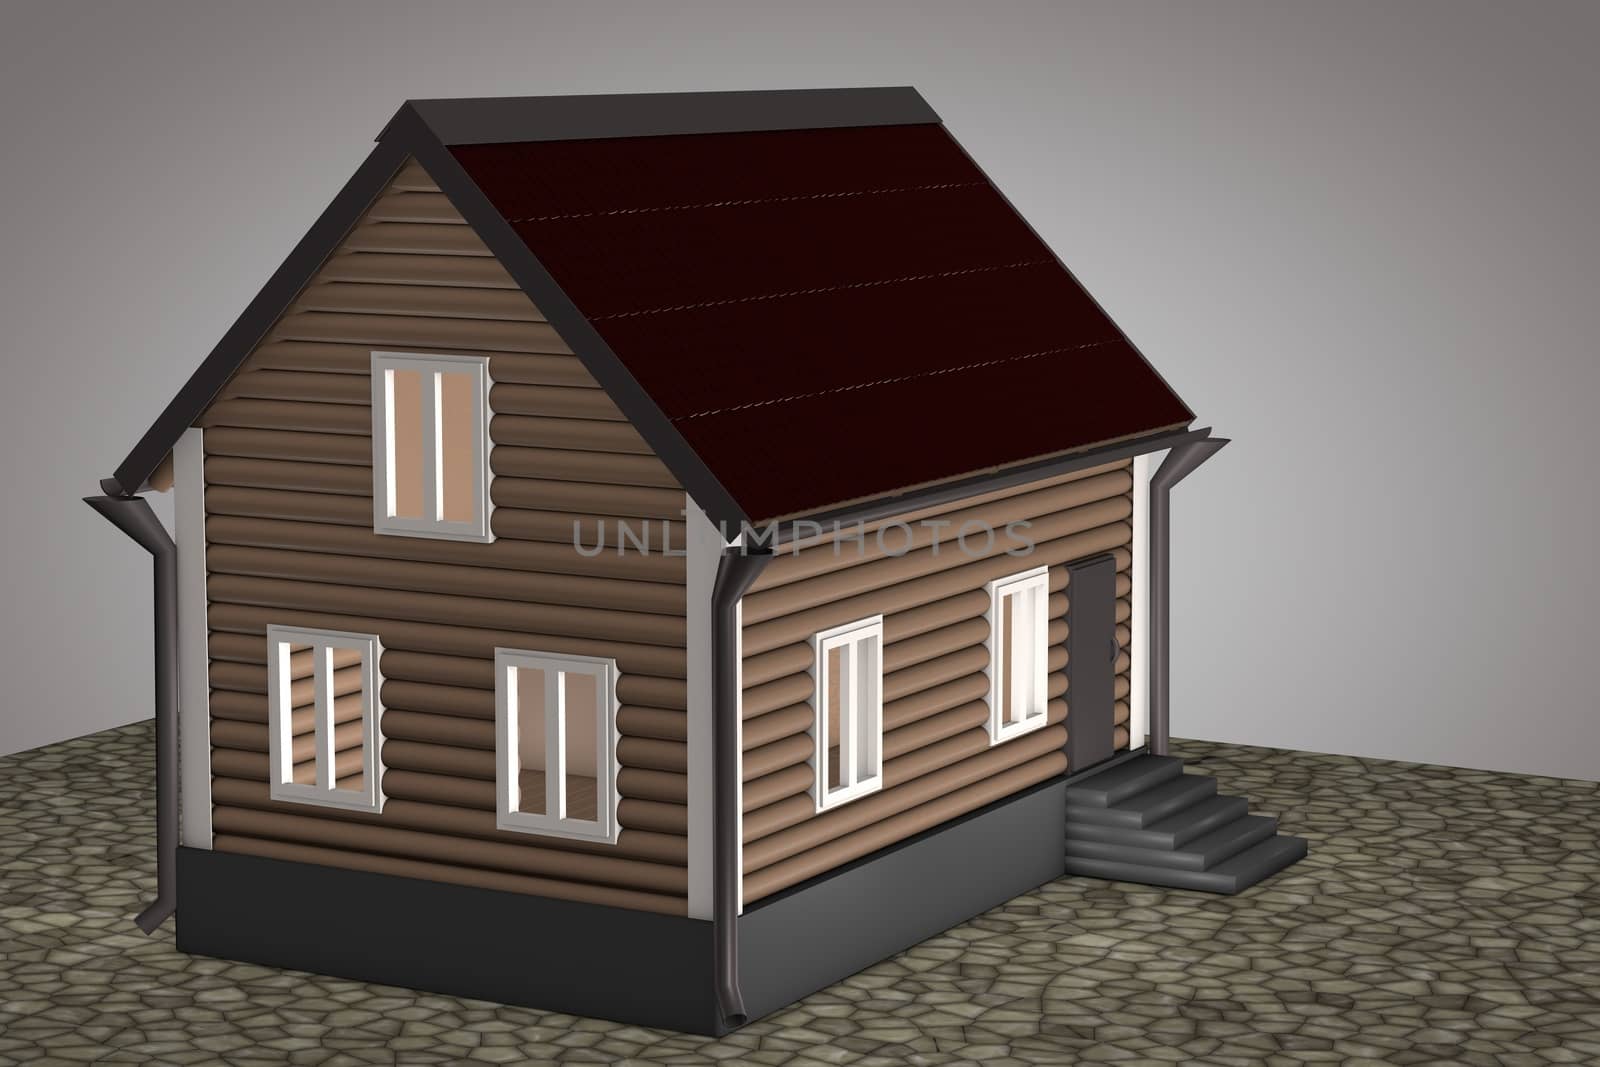 A small house with a red roof on a gray background